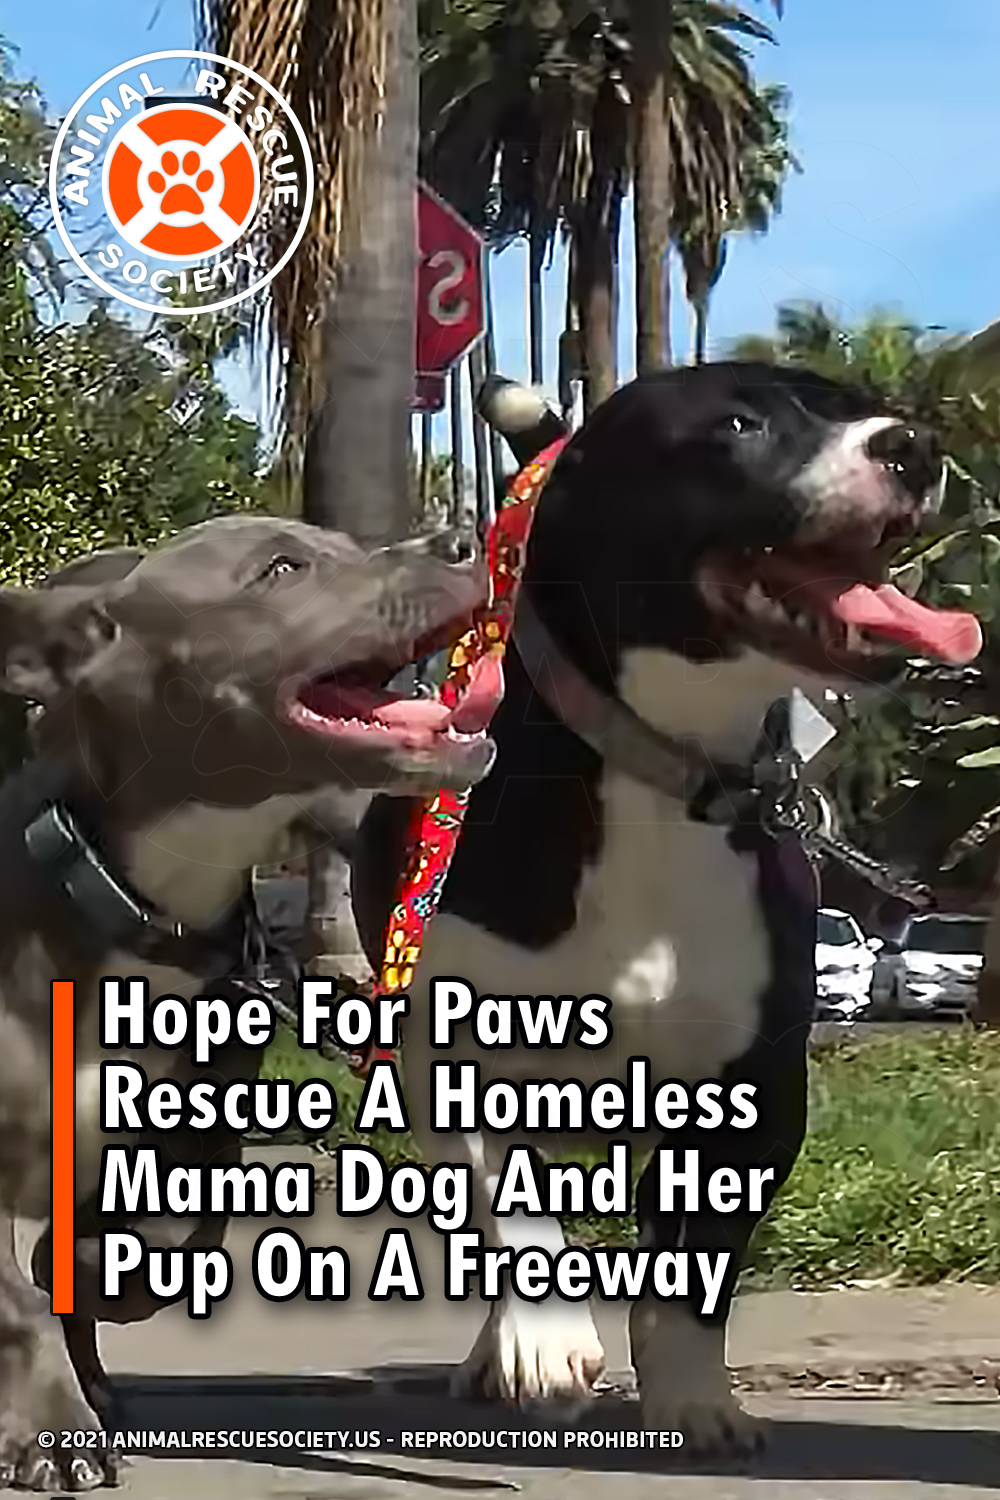 Hope For Paws Rescue A Homeless Mama Dog And Her Pup On A Freeway